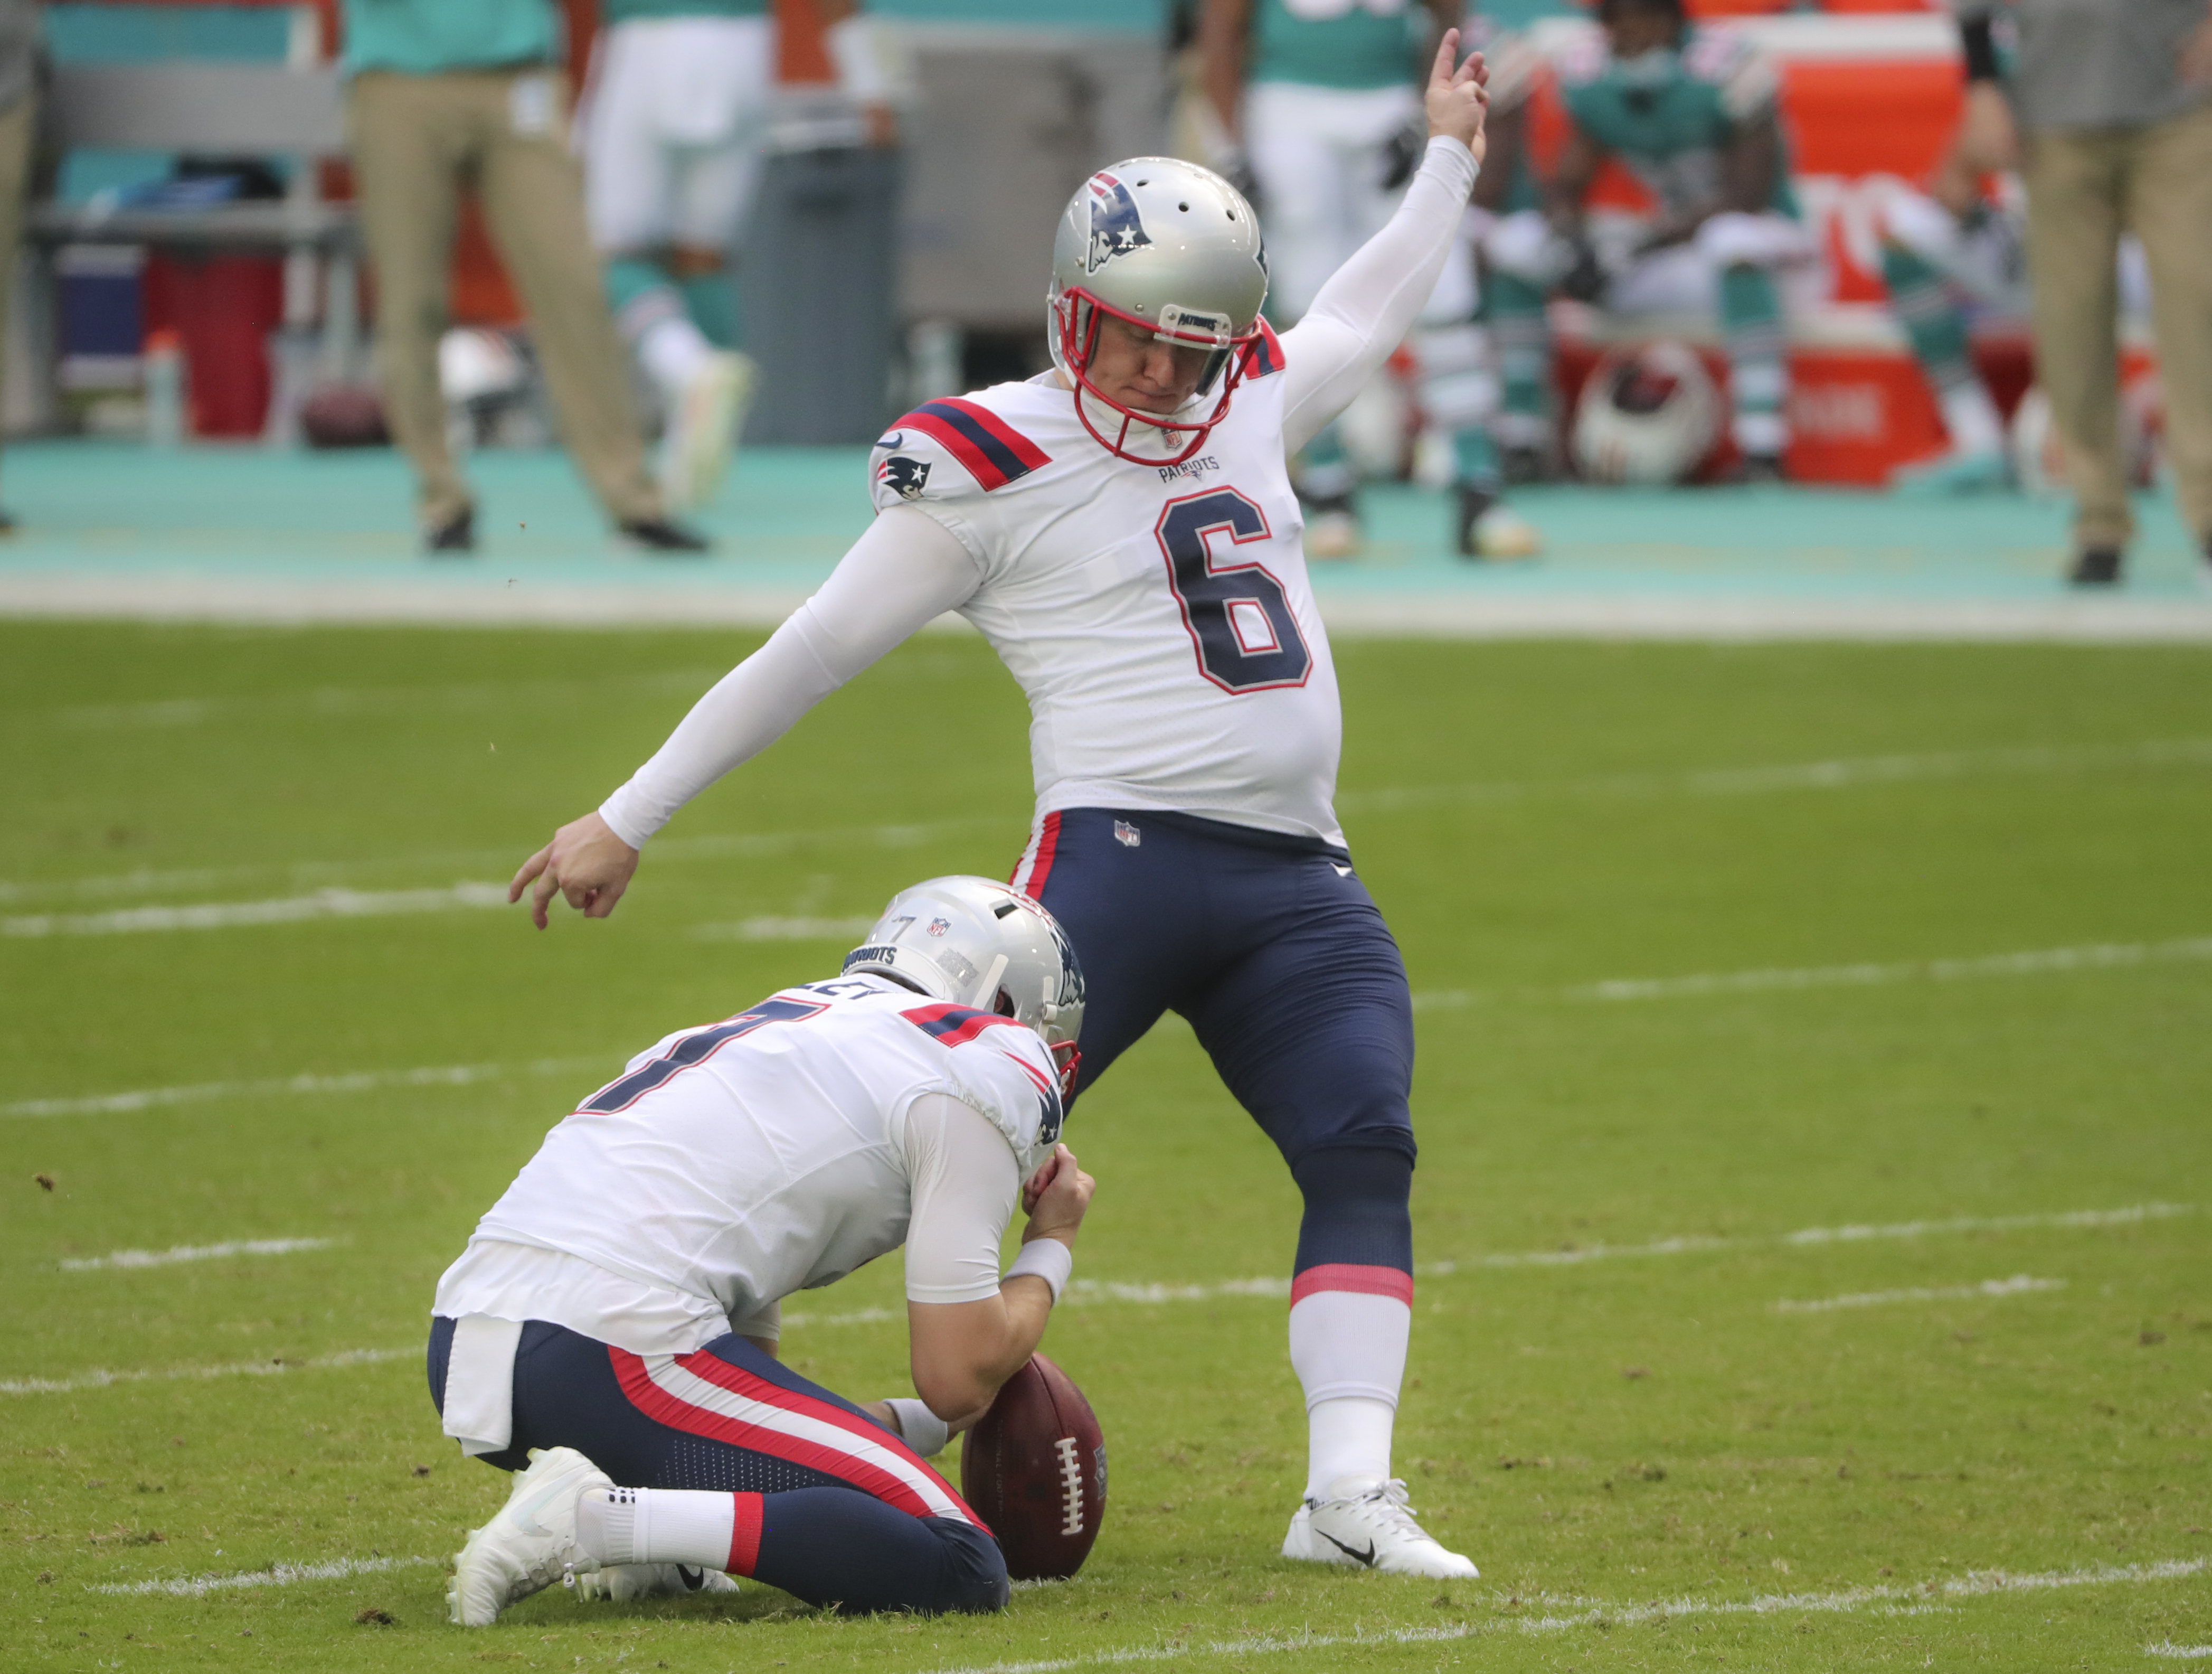 Ben Volin: The Patriots' offense needs to learn how to stop losing